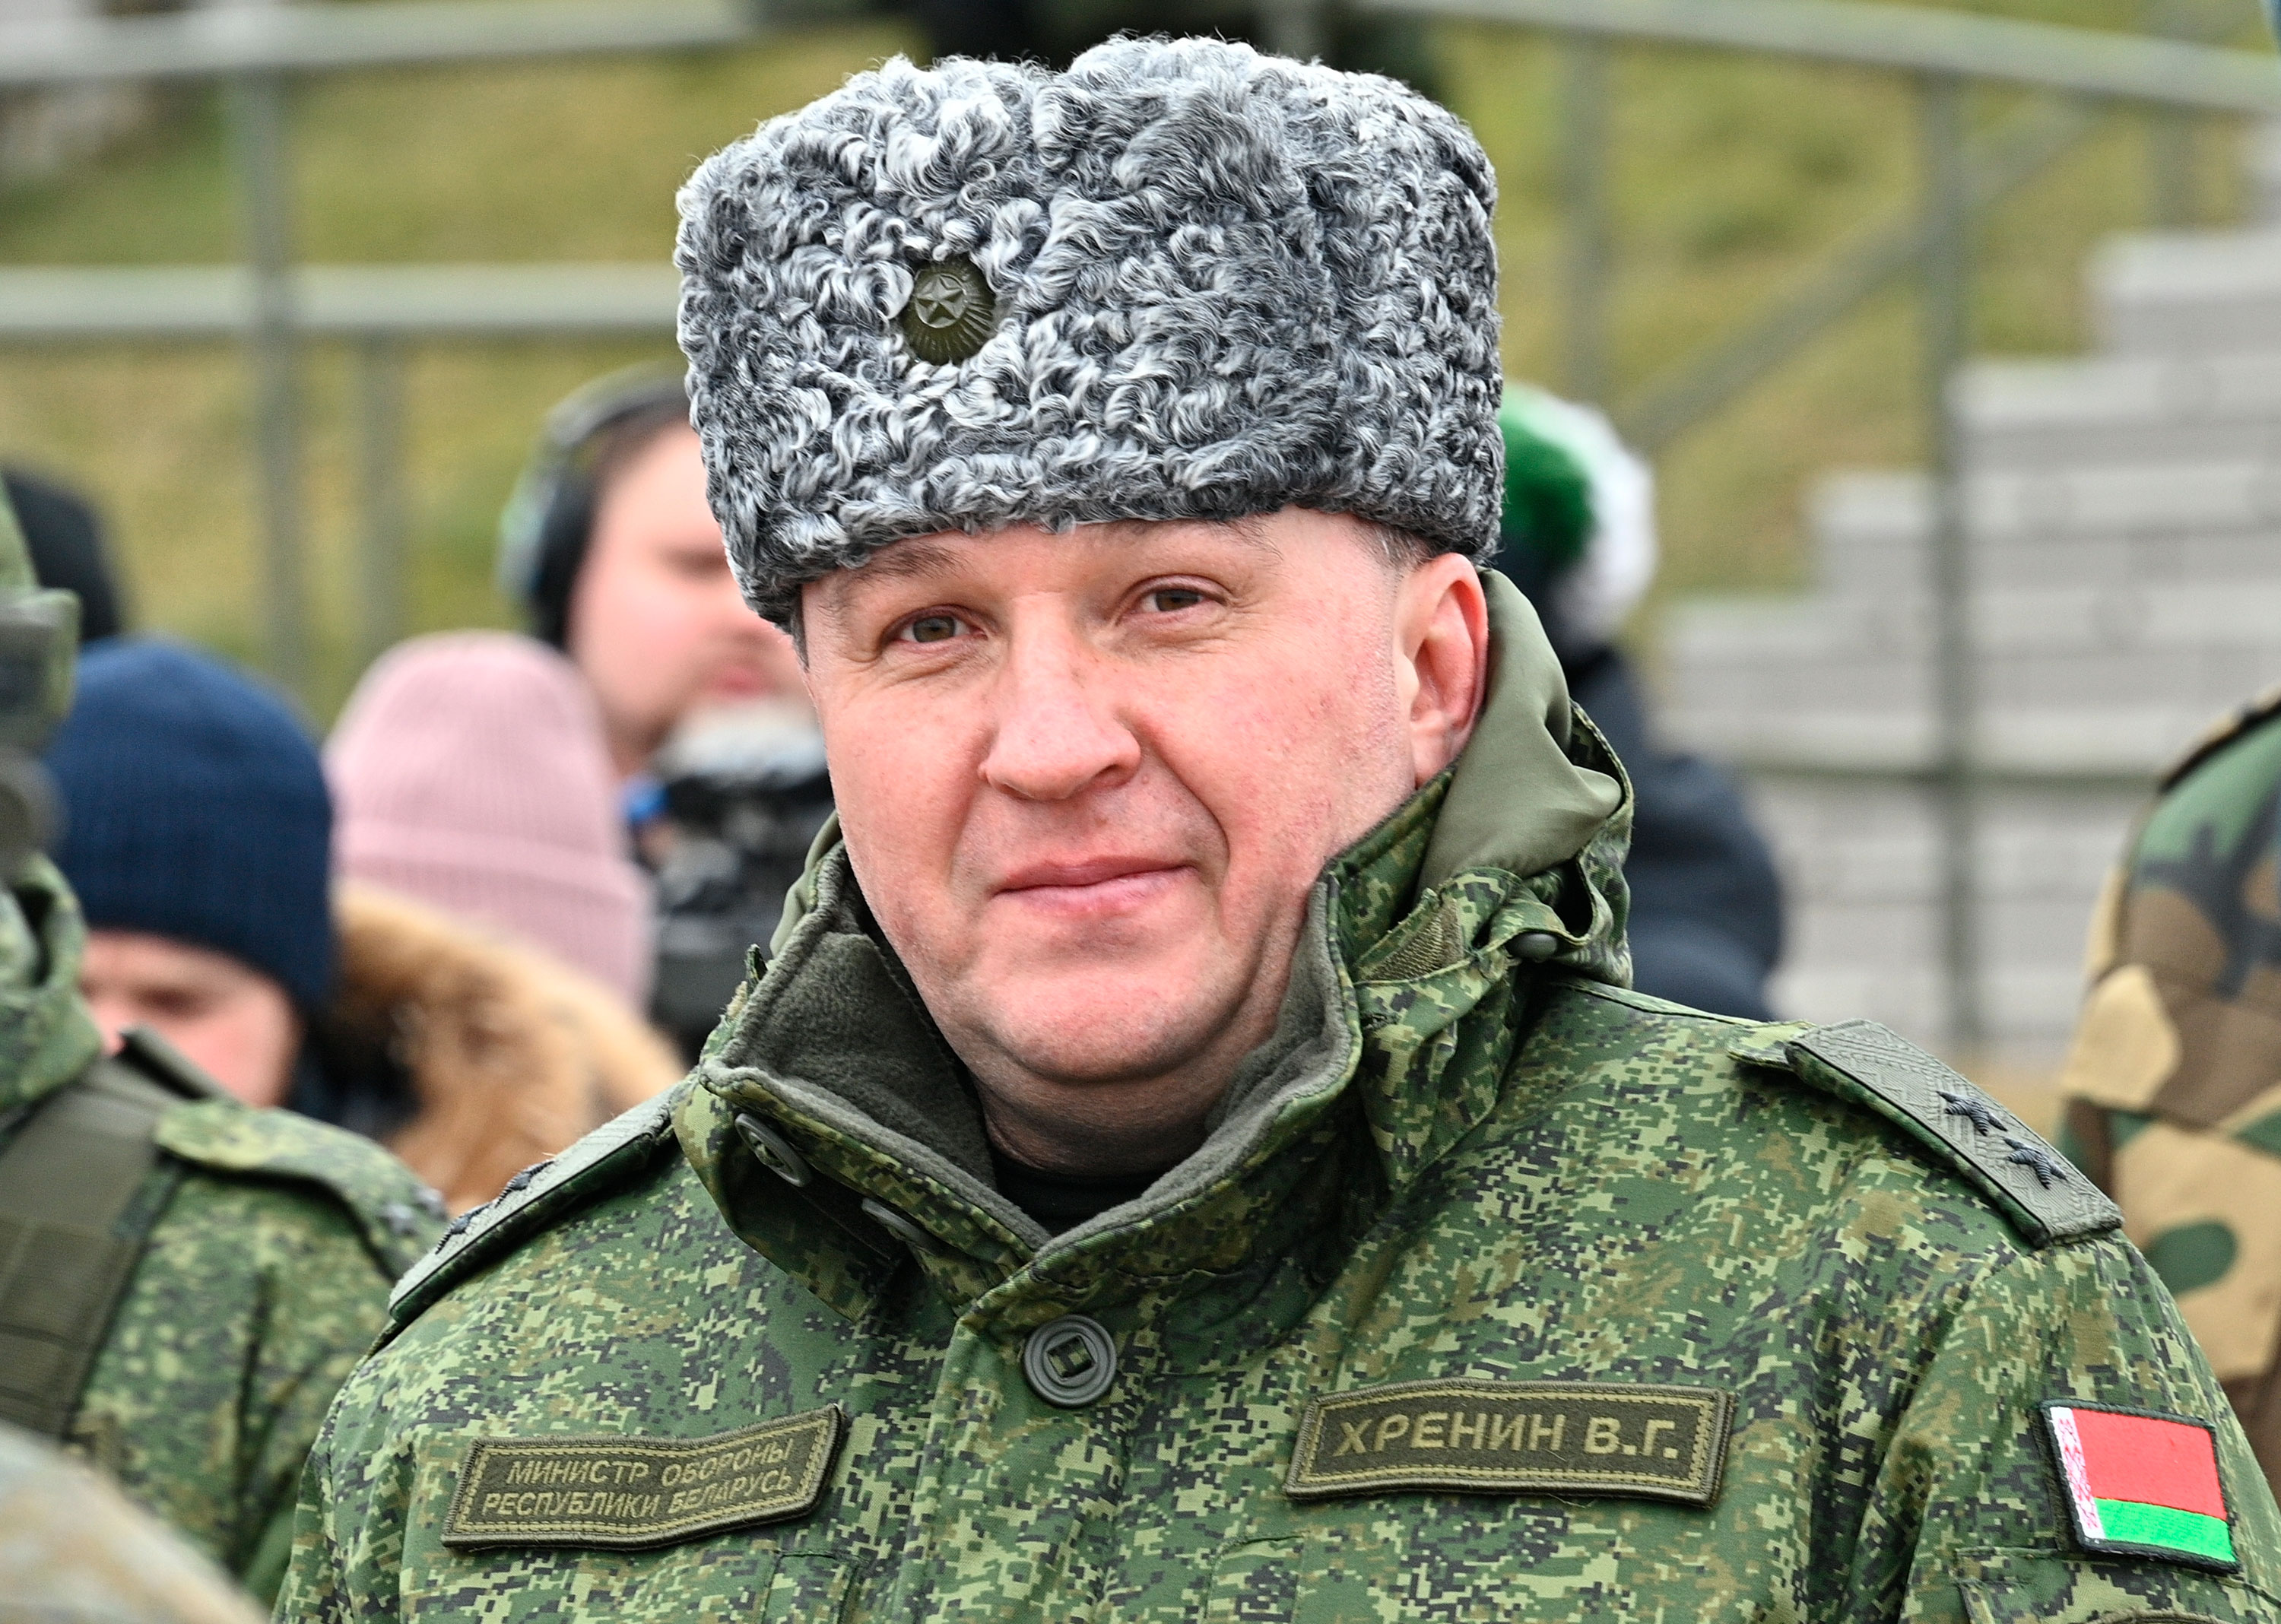 Belarusian Defense Minister Viktor Khrenin is pictured during joint military drills between Belarus and Russia at the training ground in Belarus on February 19.